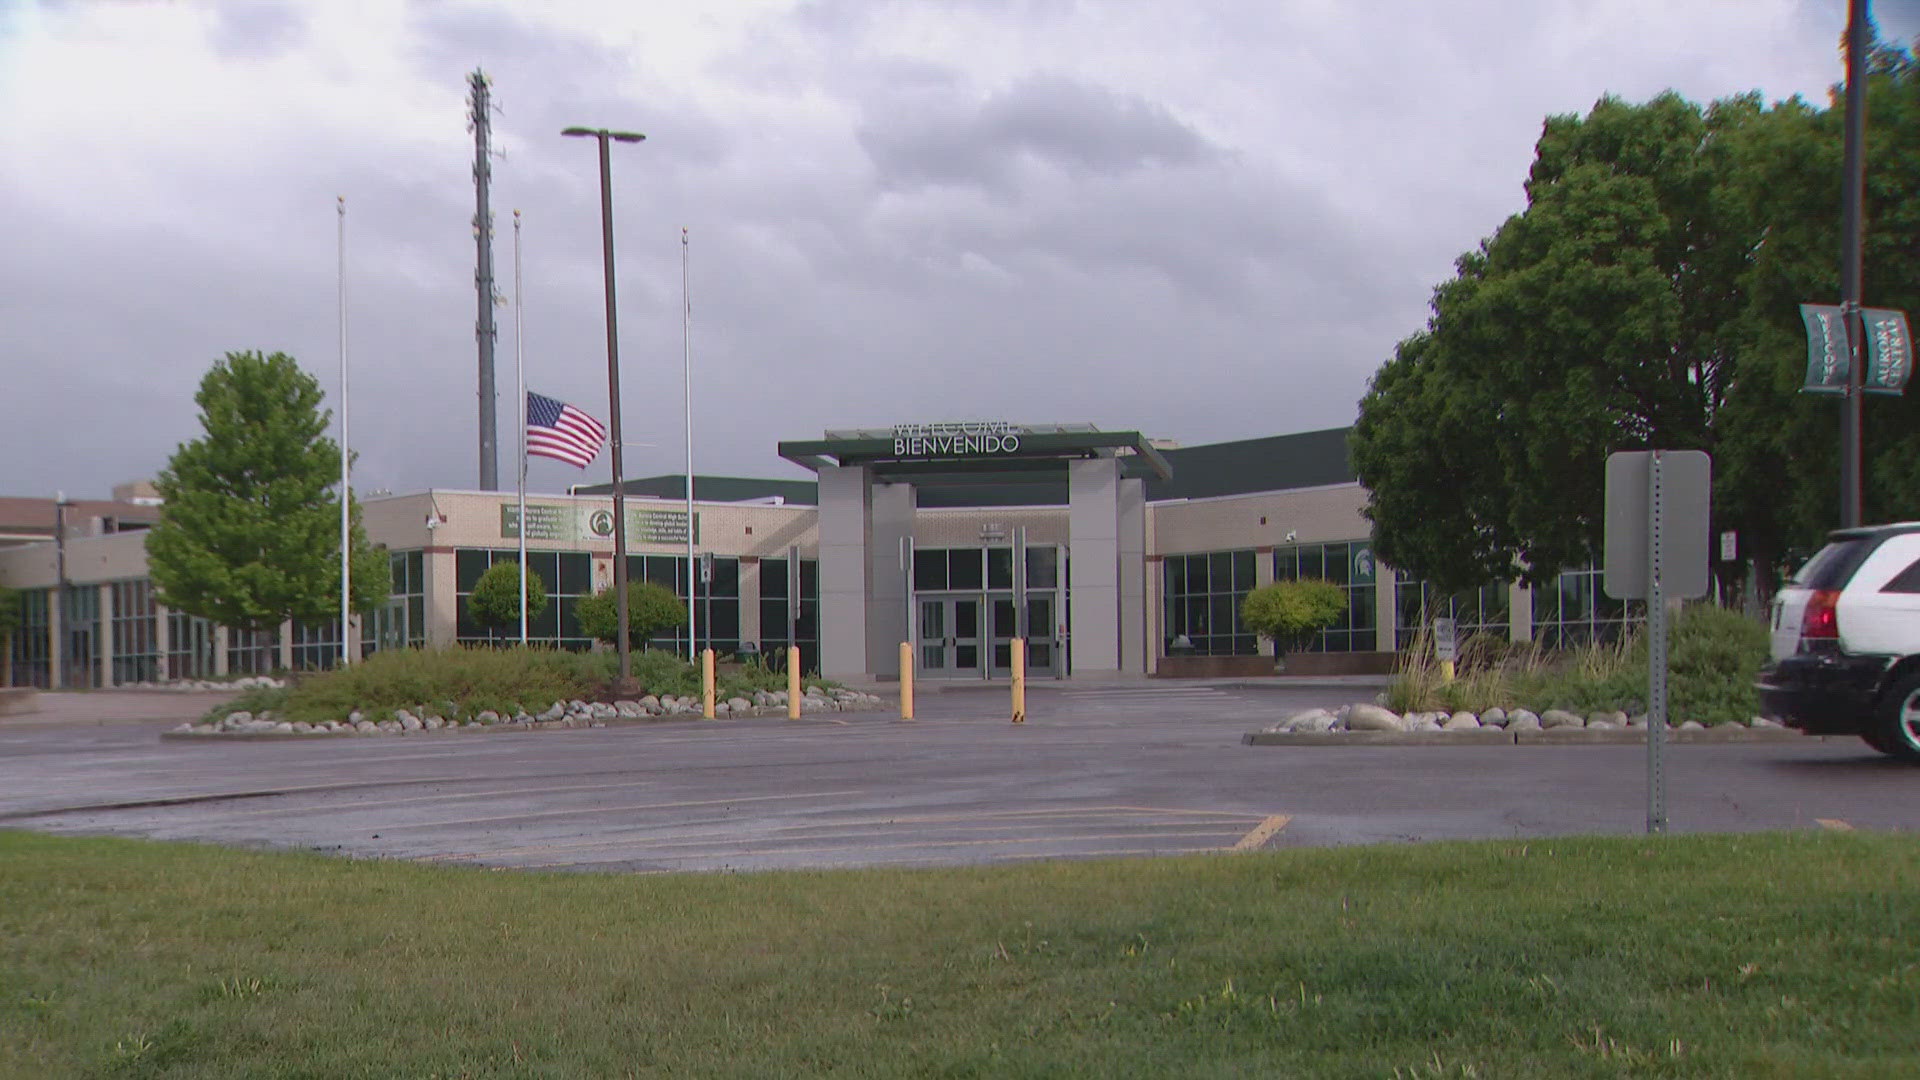 A former Aurora police officer is accused of sending inappropriate texts to a student at Aurora Central High School.